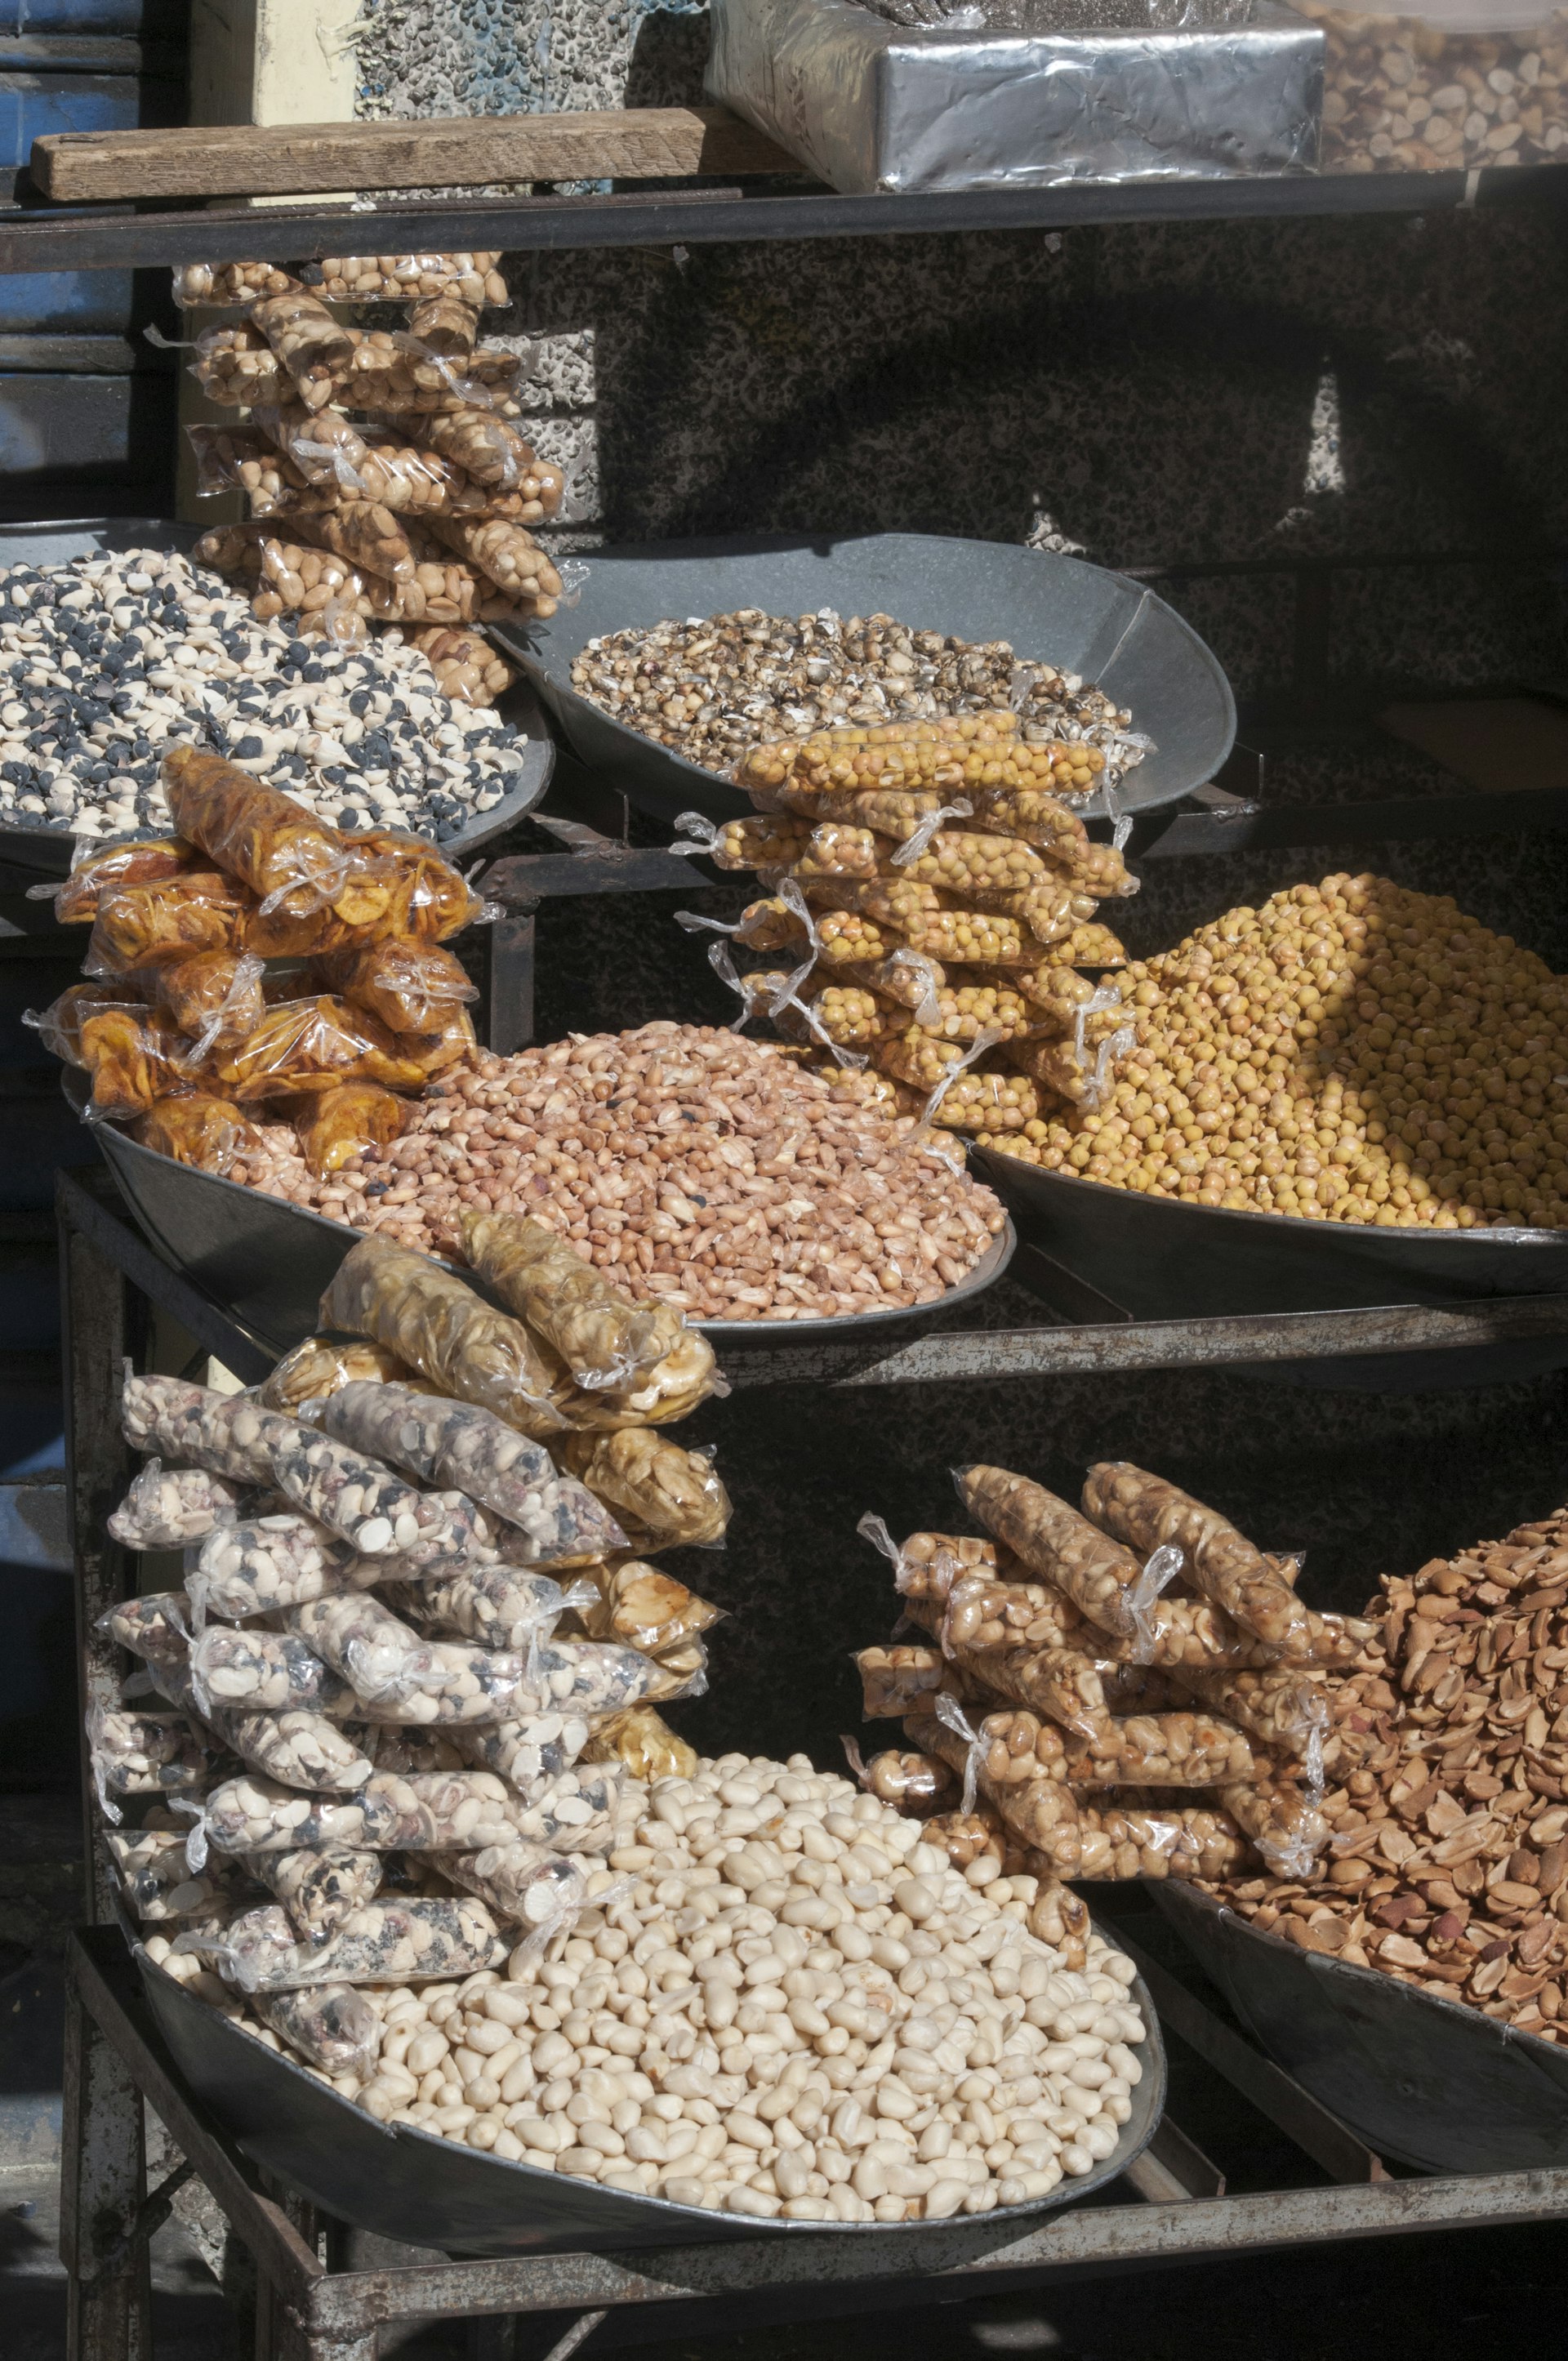 Features - Pulses, nuts, for sale in Calle Illampu, La Paz